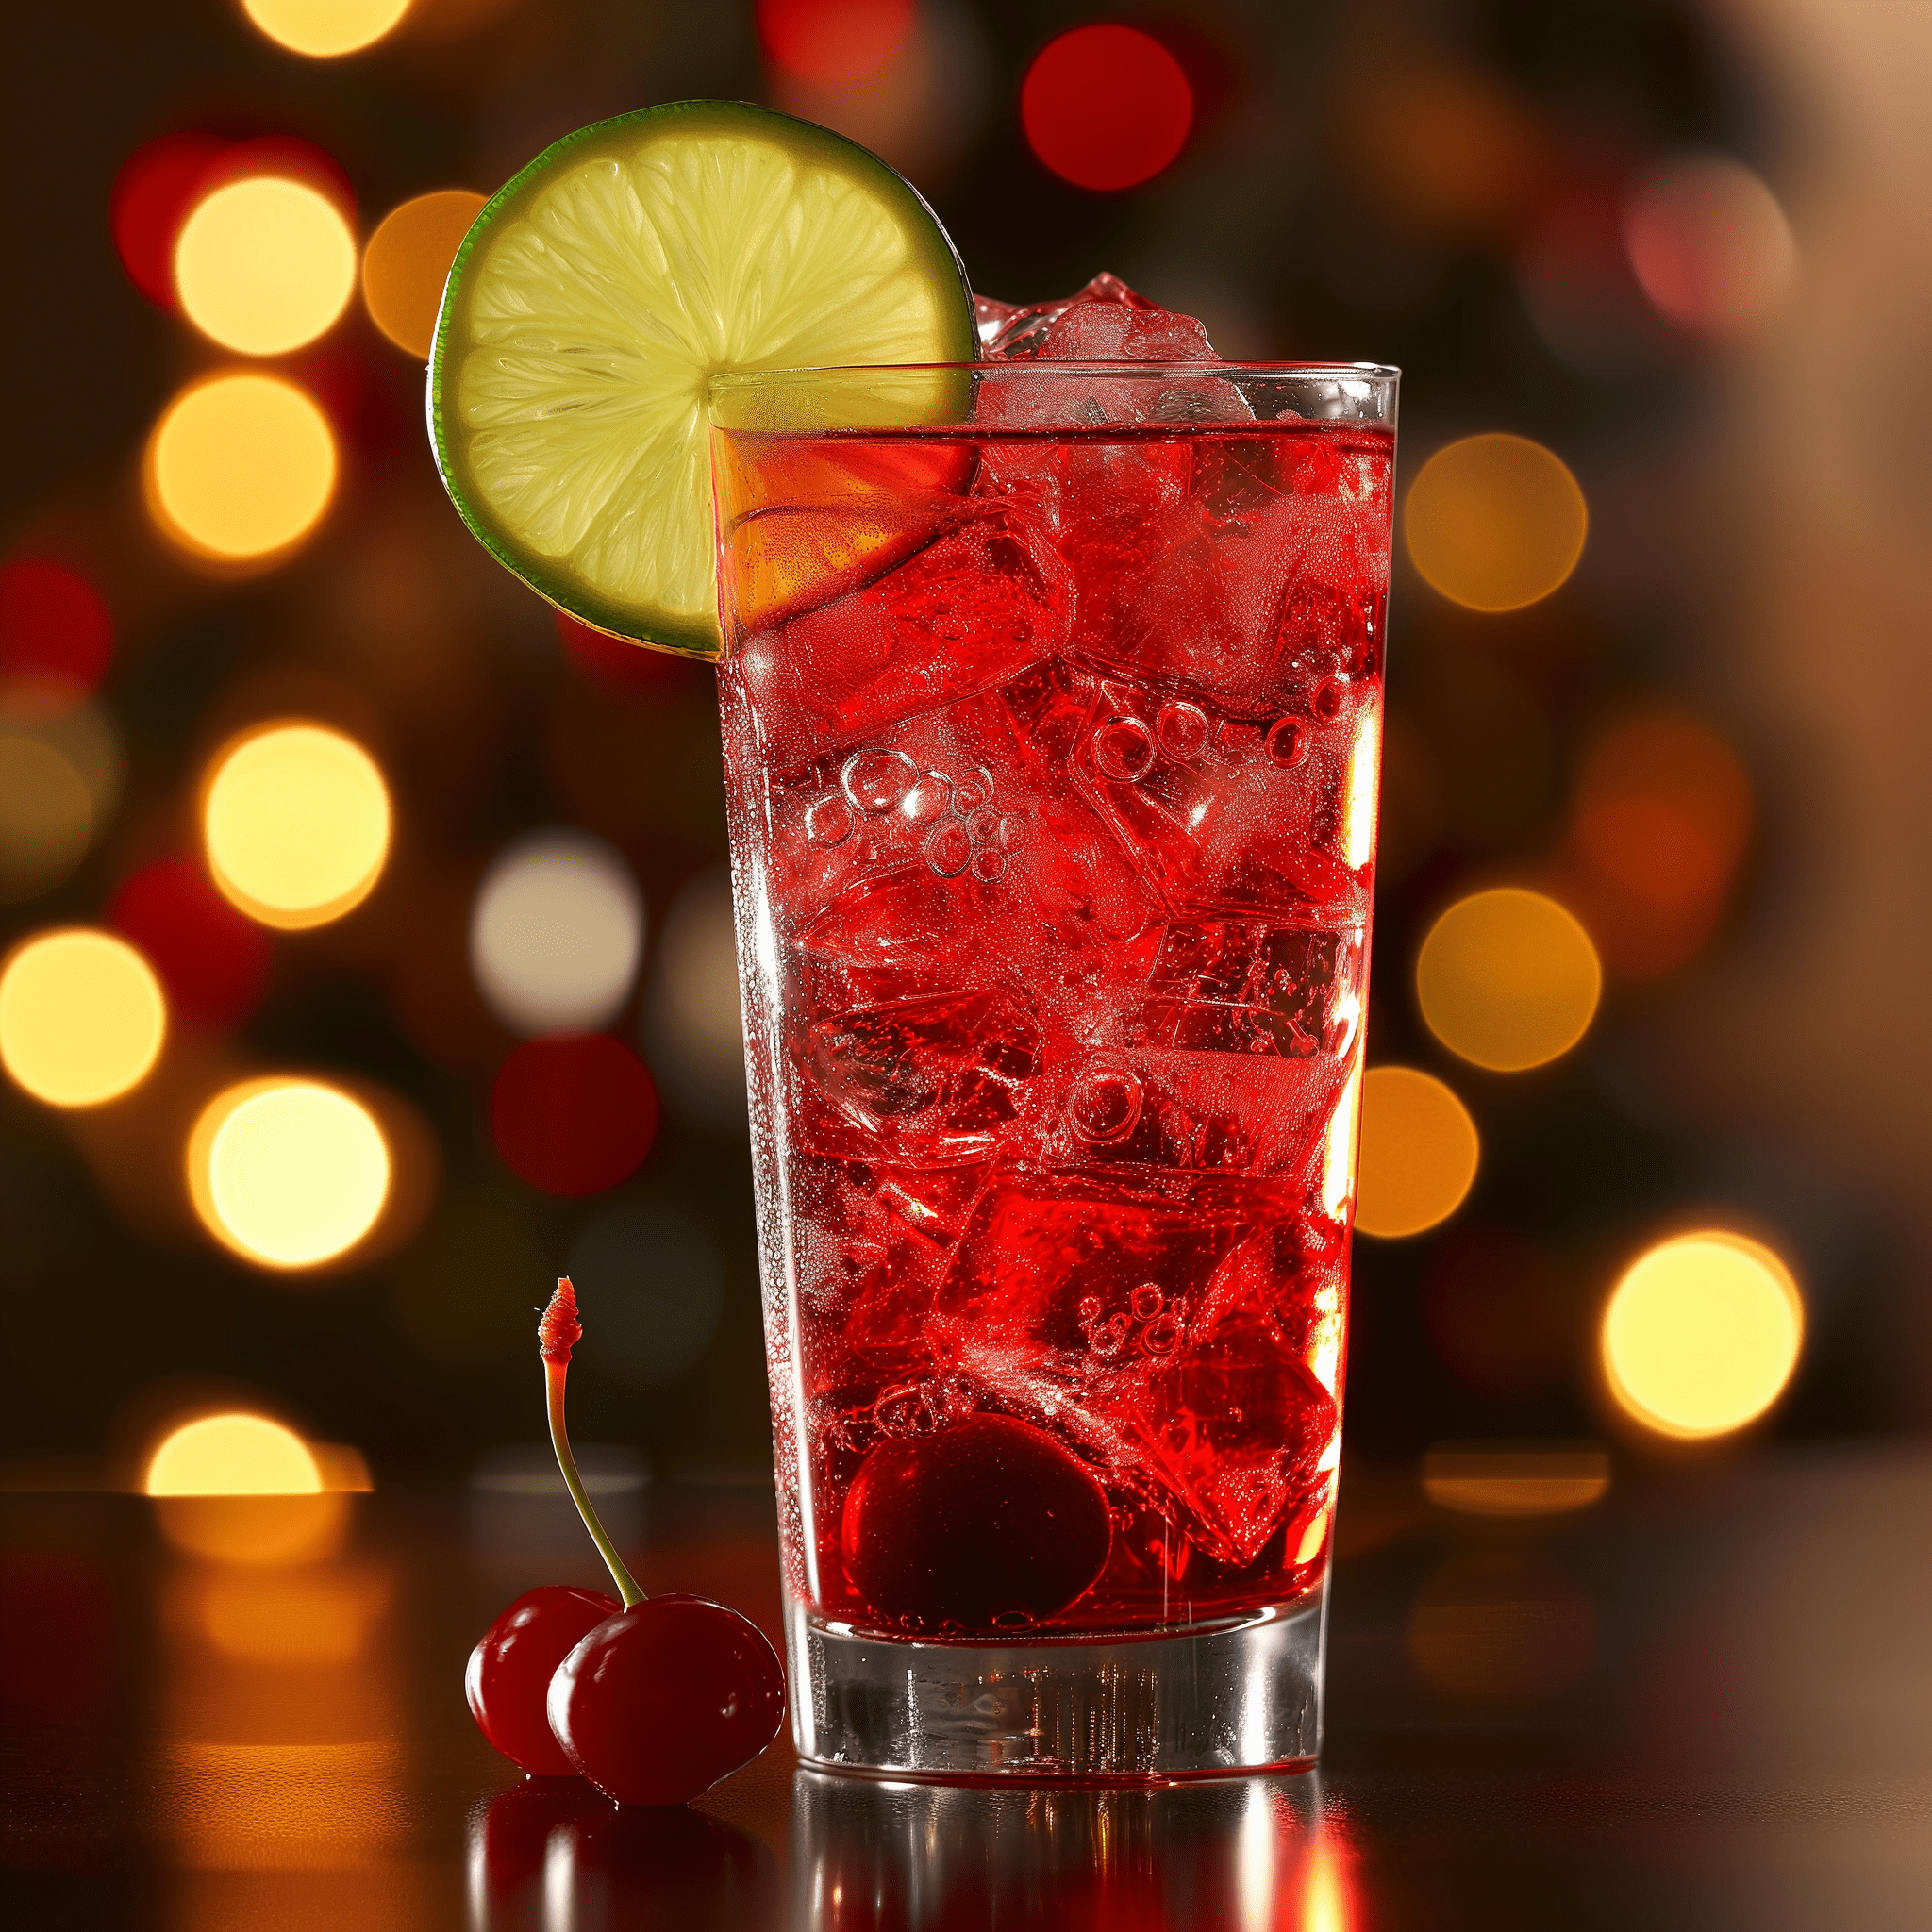 Shirley Temple Mocktail Recipe - The Shirley Temple Mocktail is sweet and bubbly with a hint of citrus from the lime juice. It's a refreshing drink with a vibrant red hue that comes from the grenadine.